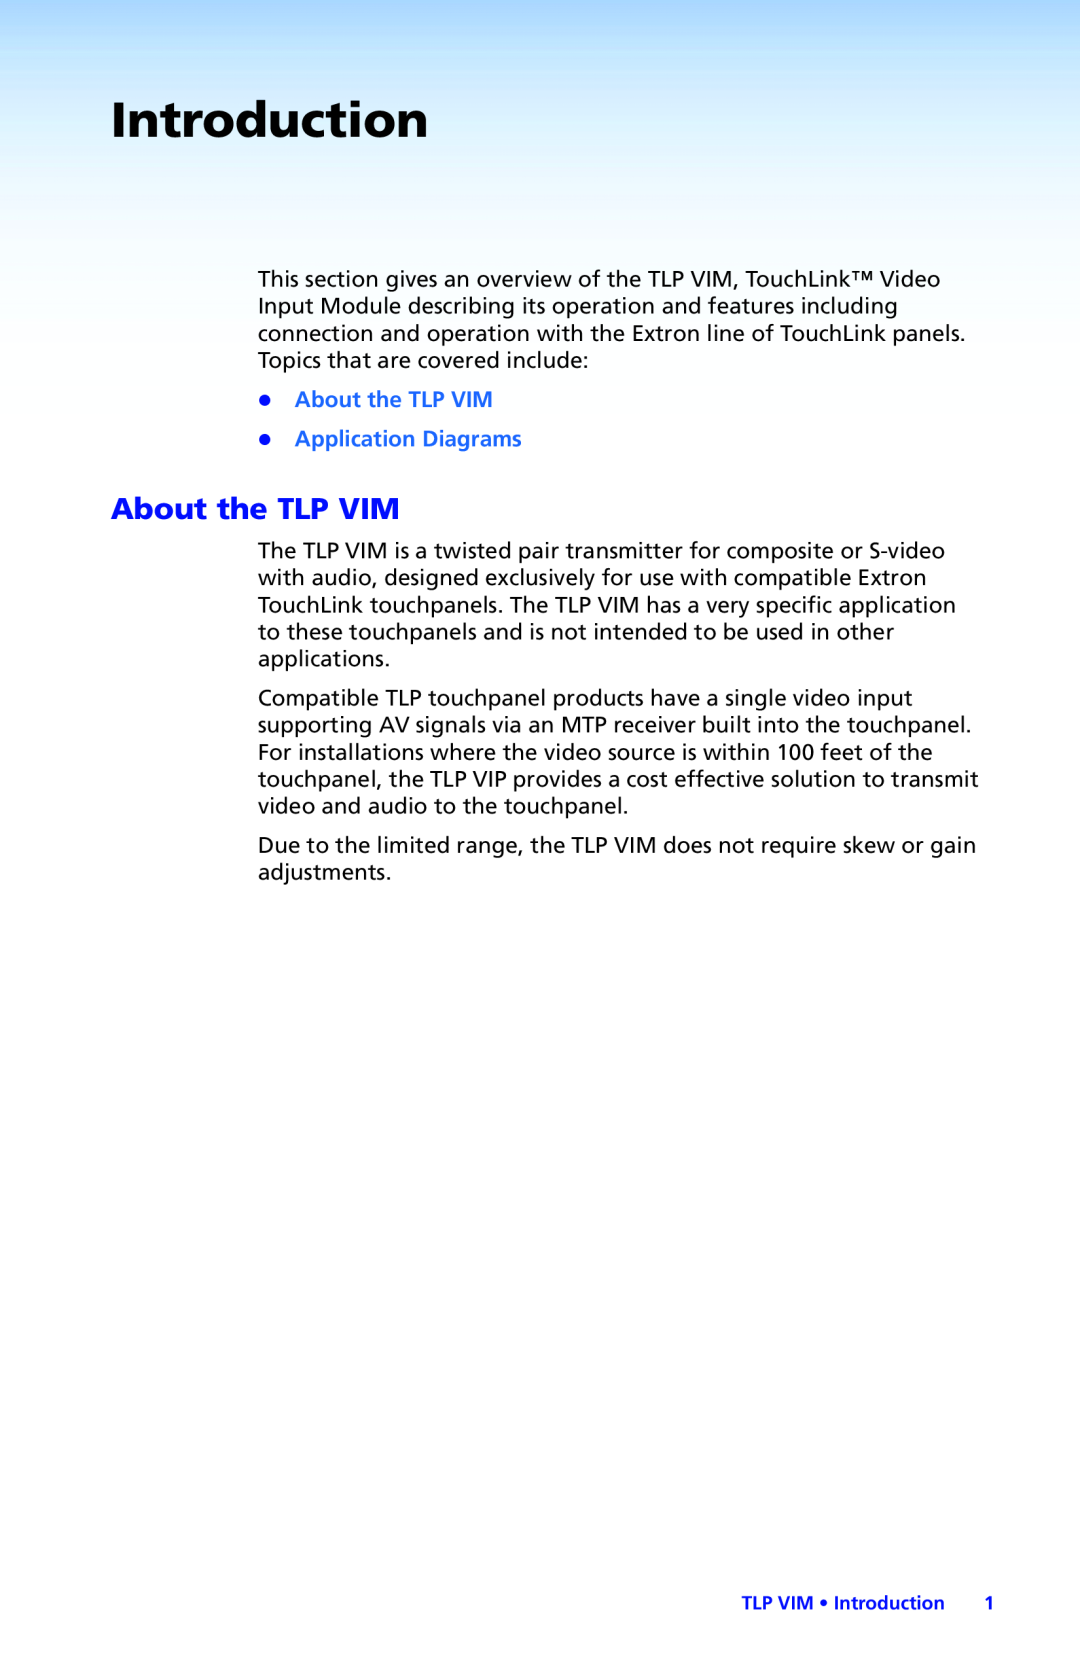 Extron electronic manual Introduction, zz About the TLP VIM zz Application Diagrams 